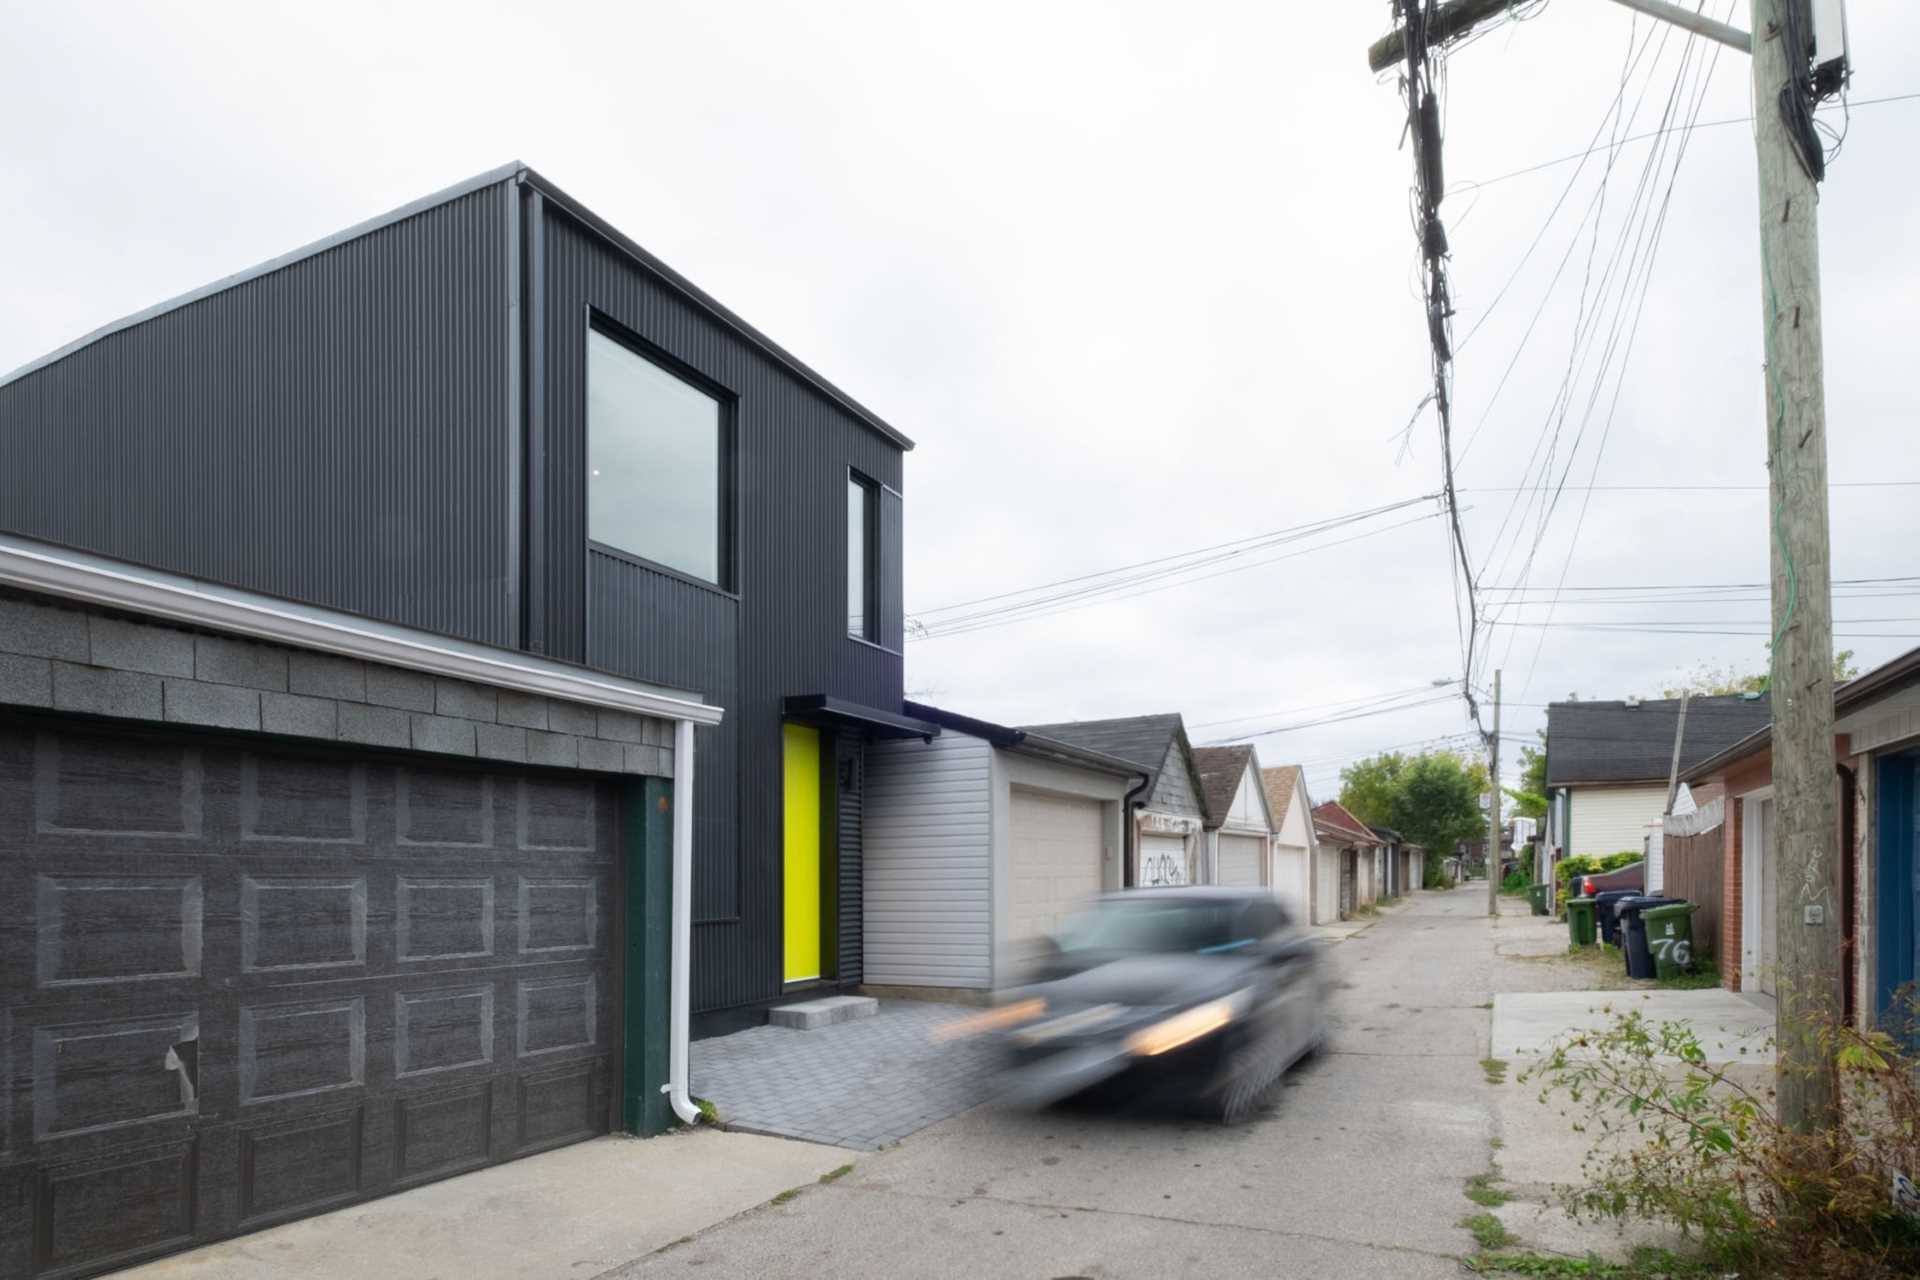 A modern two-storey laneway house with a black exterior and bright yellow door.